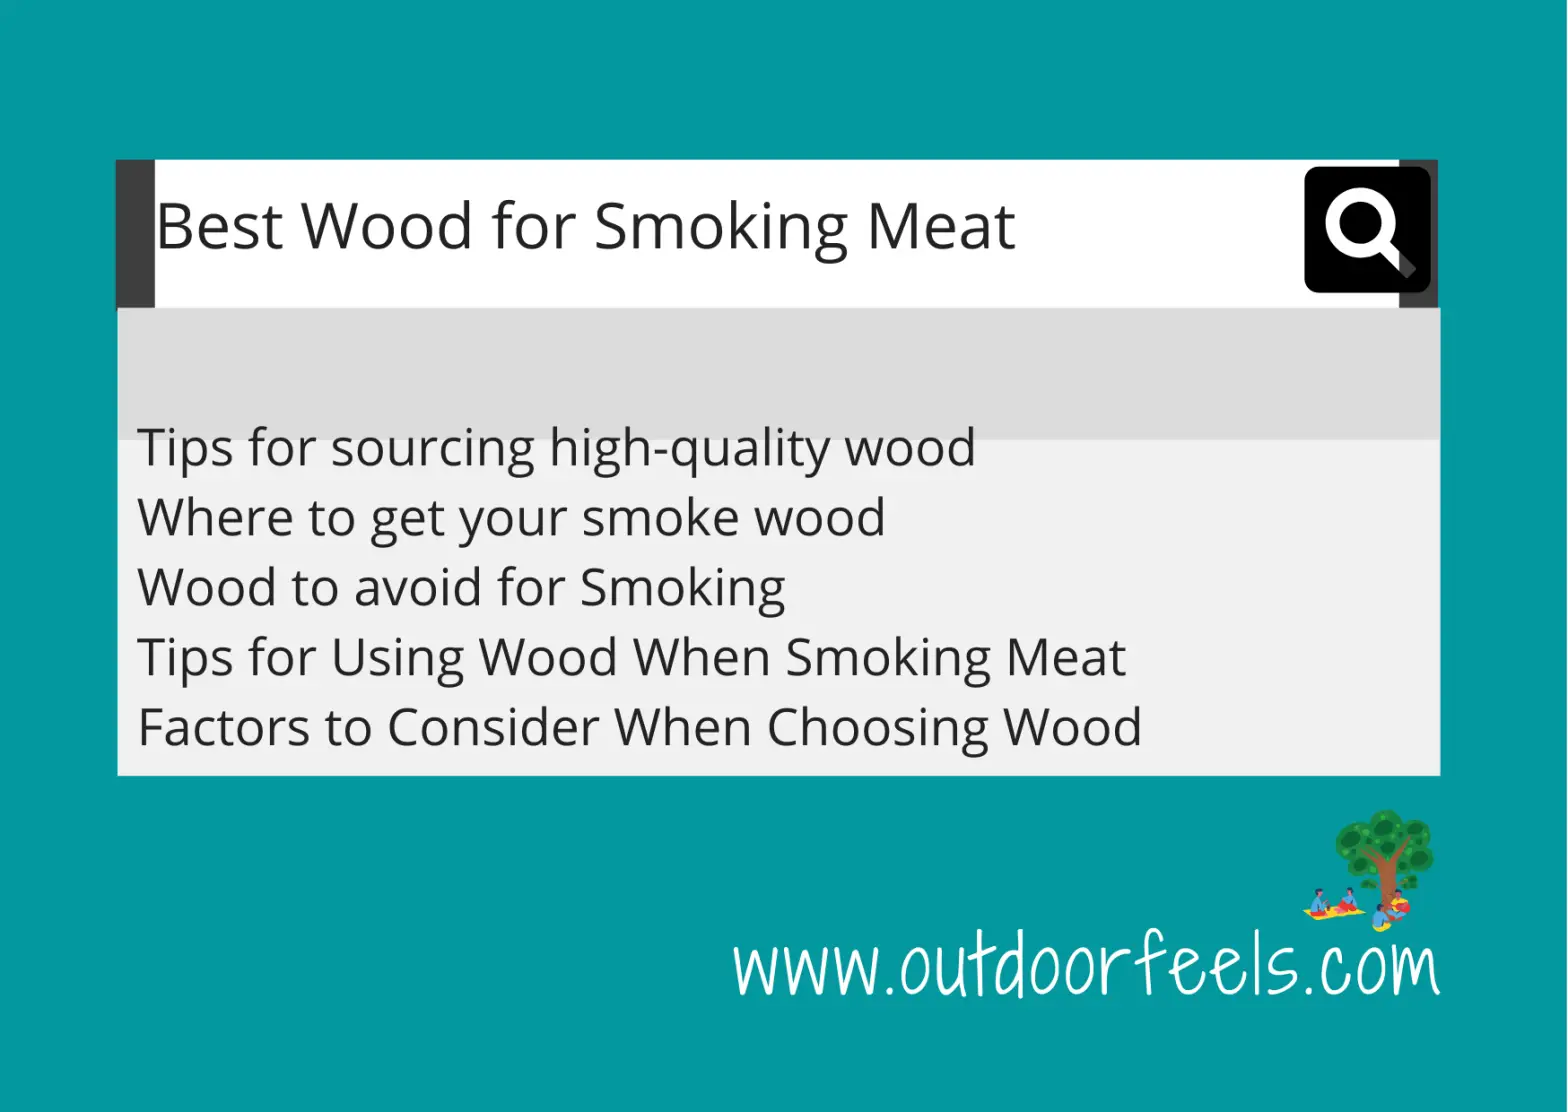 Best wood for smoking meat